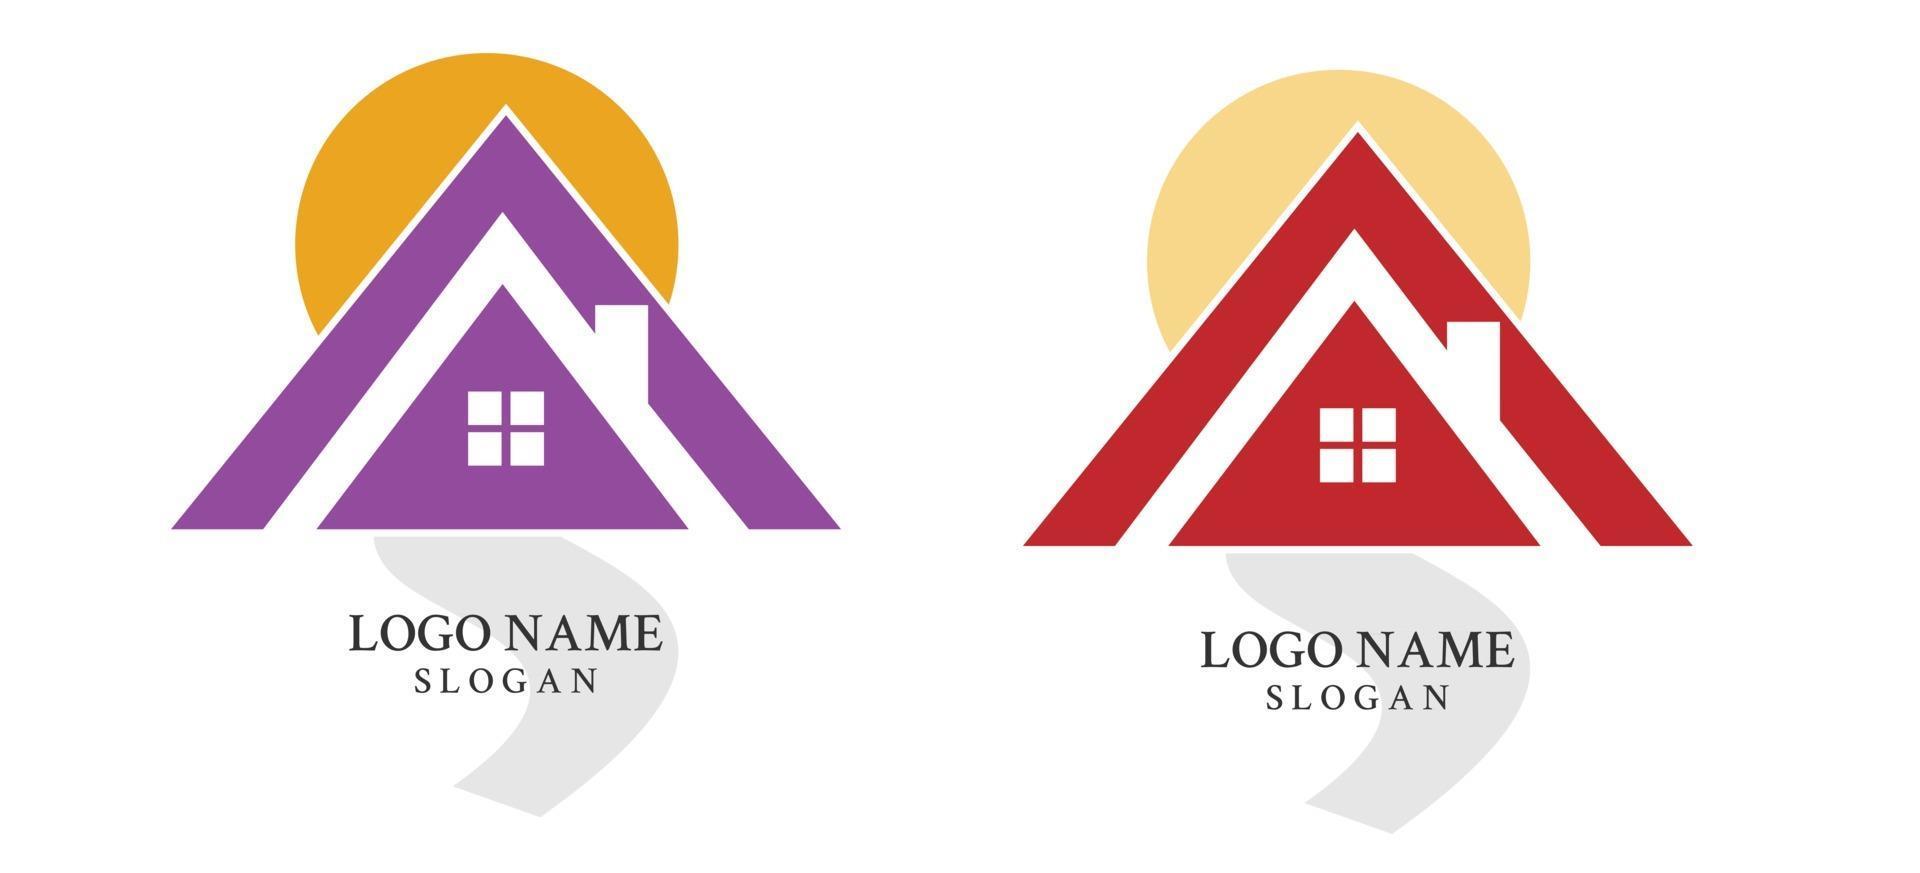 Download home buildings logo and symbols icons template Free Vector ...